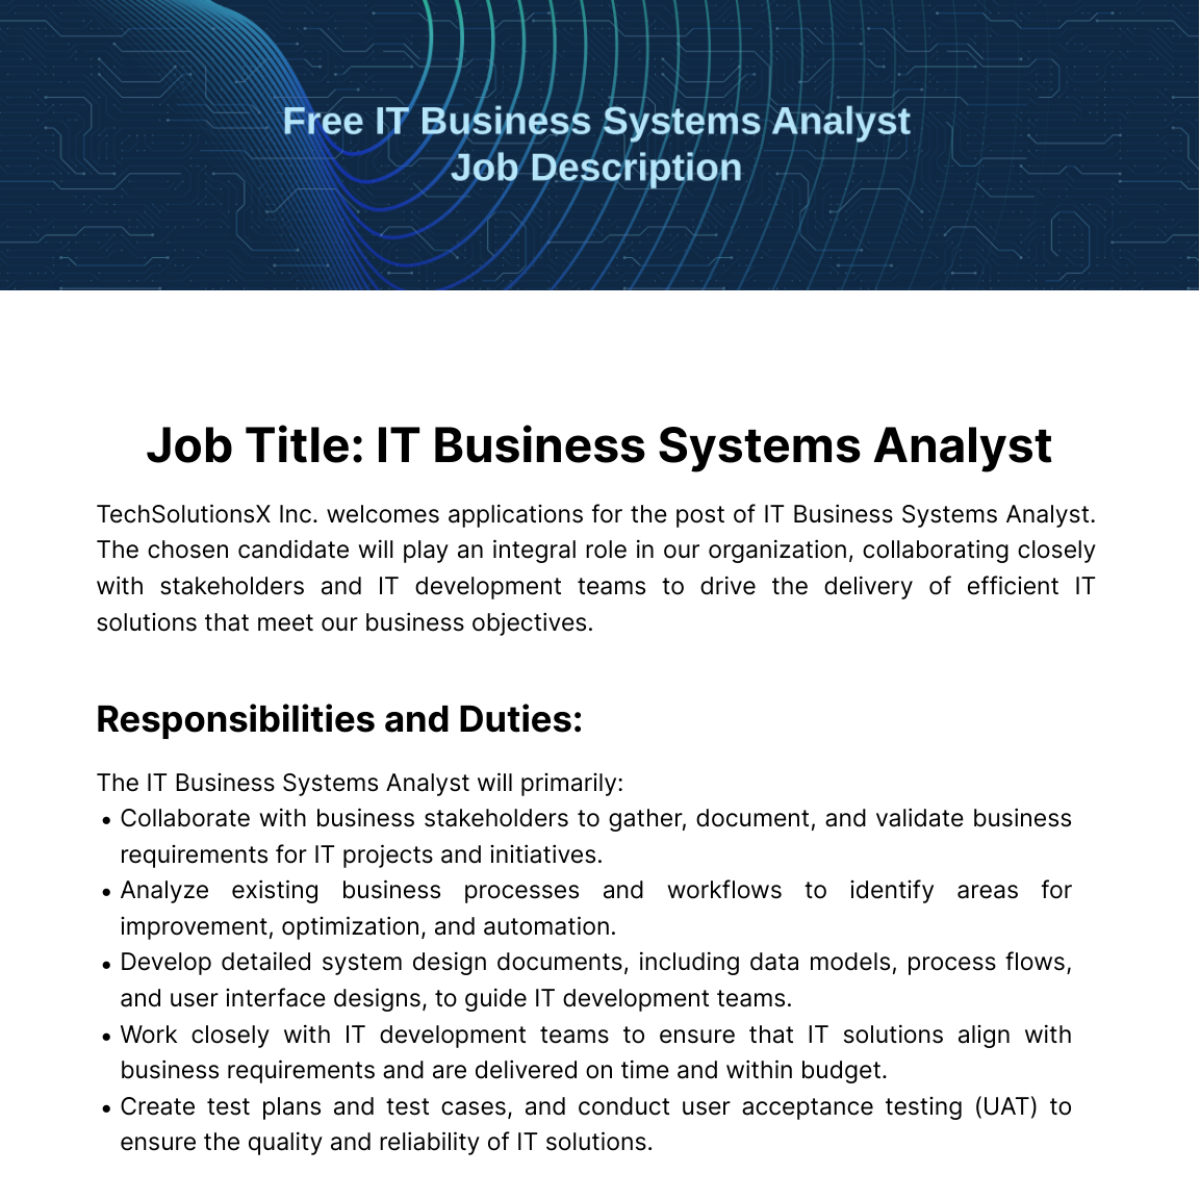 Free IT Business Systems Analyst Job Description Template